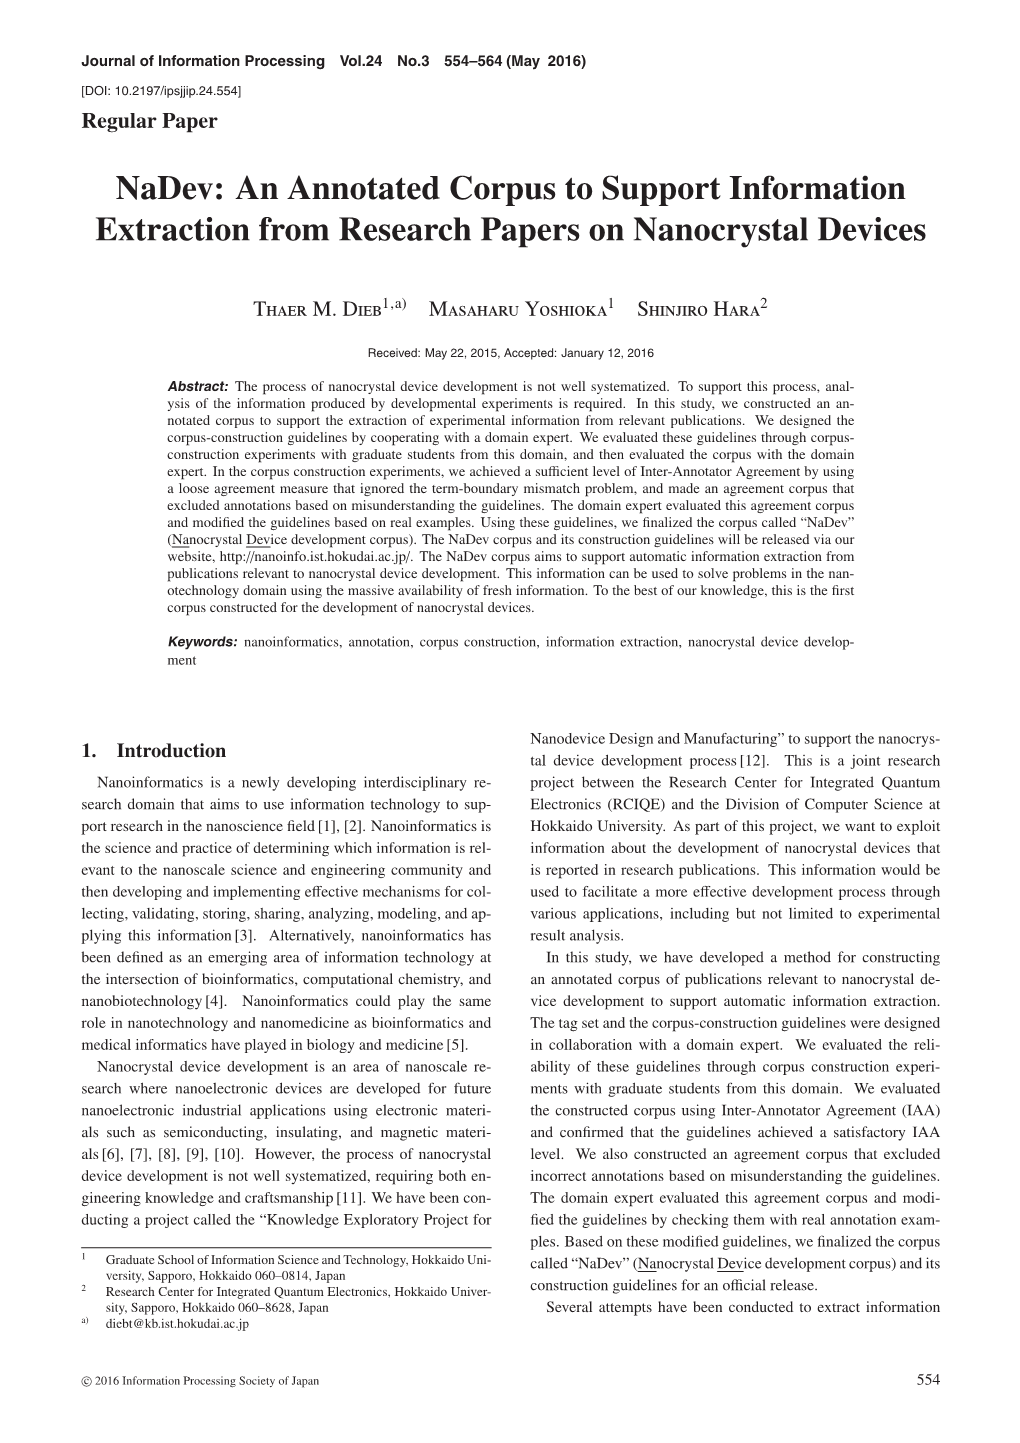 Nadev: an Annotated Corpus to Support Information Extraction from Research Papers on Nanocrystal Devices